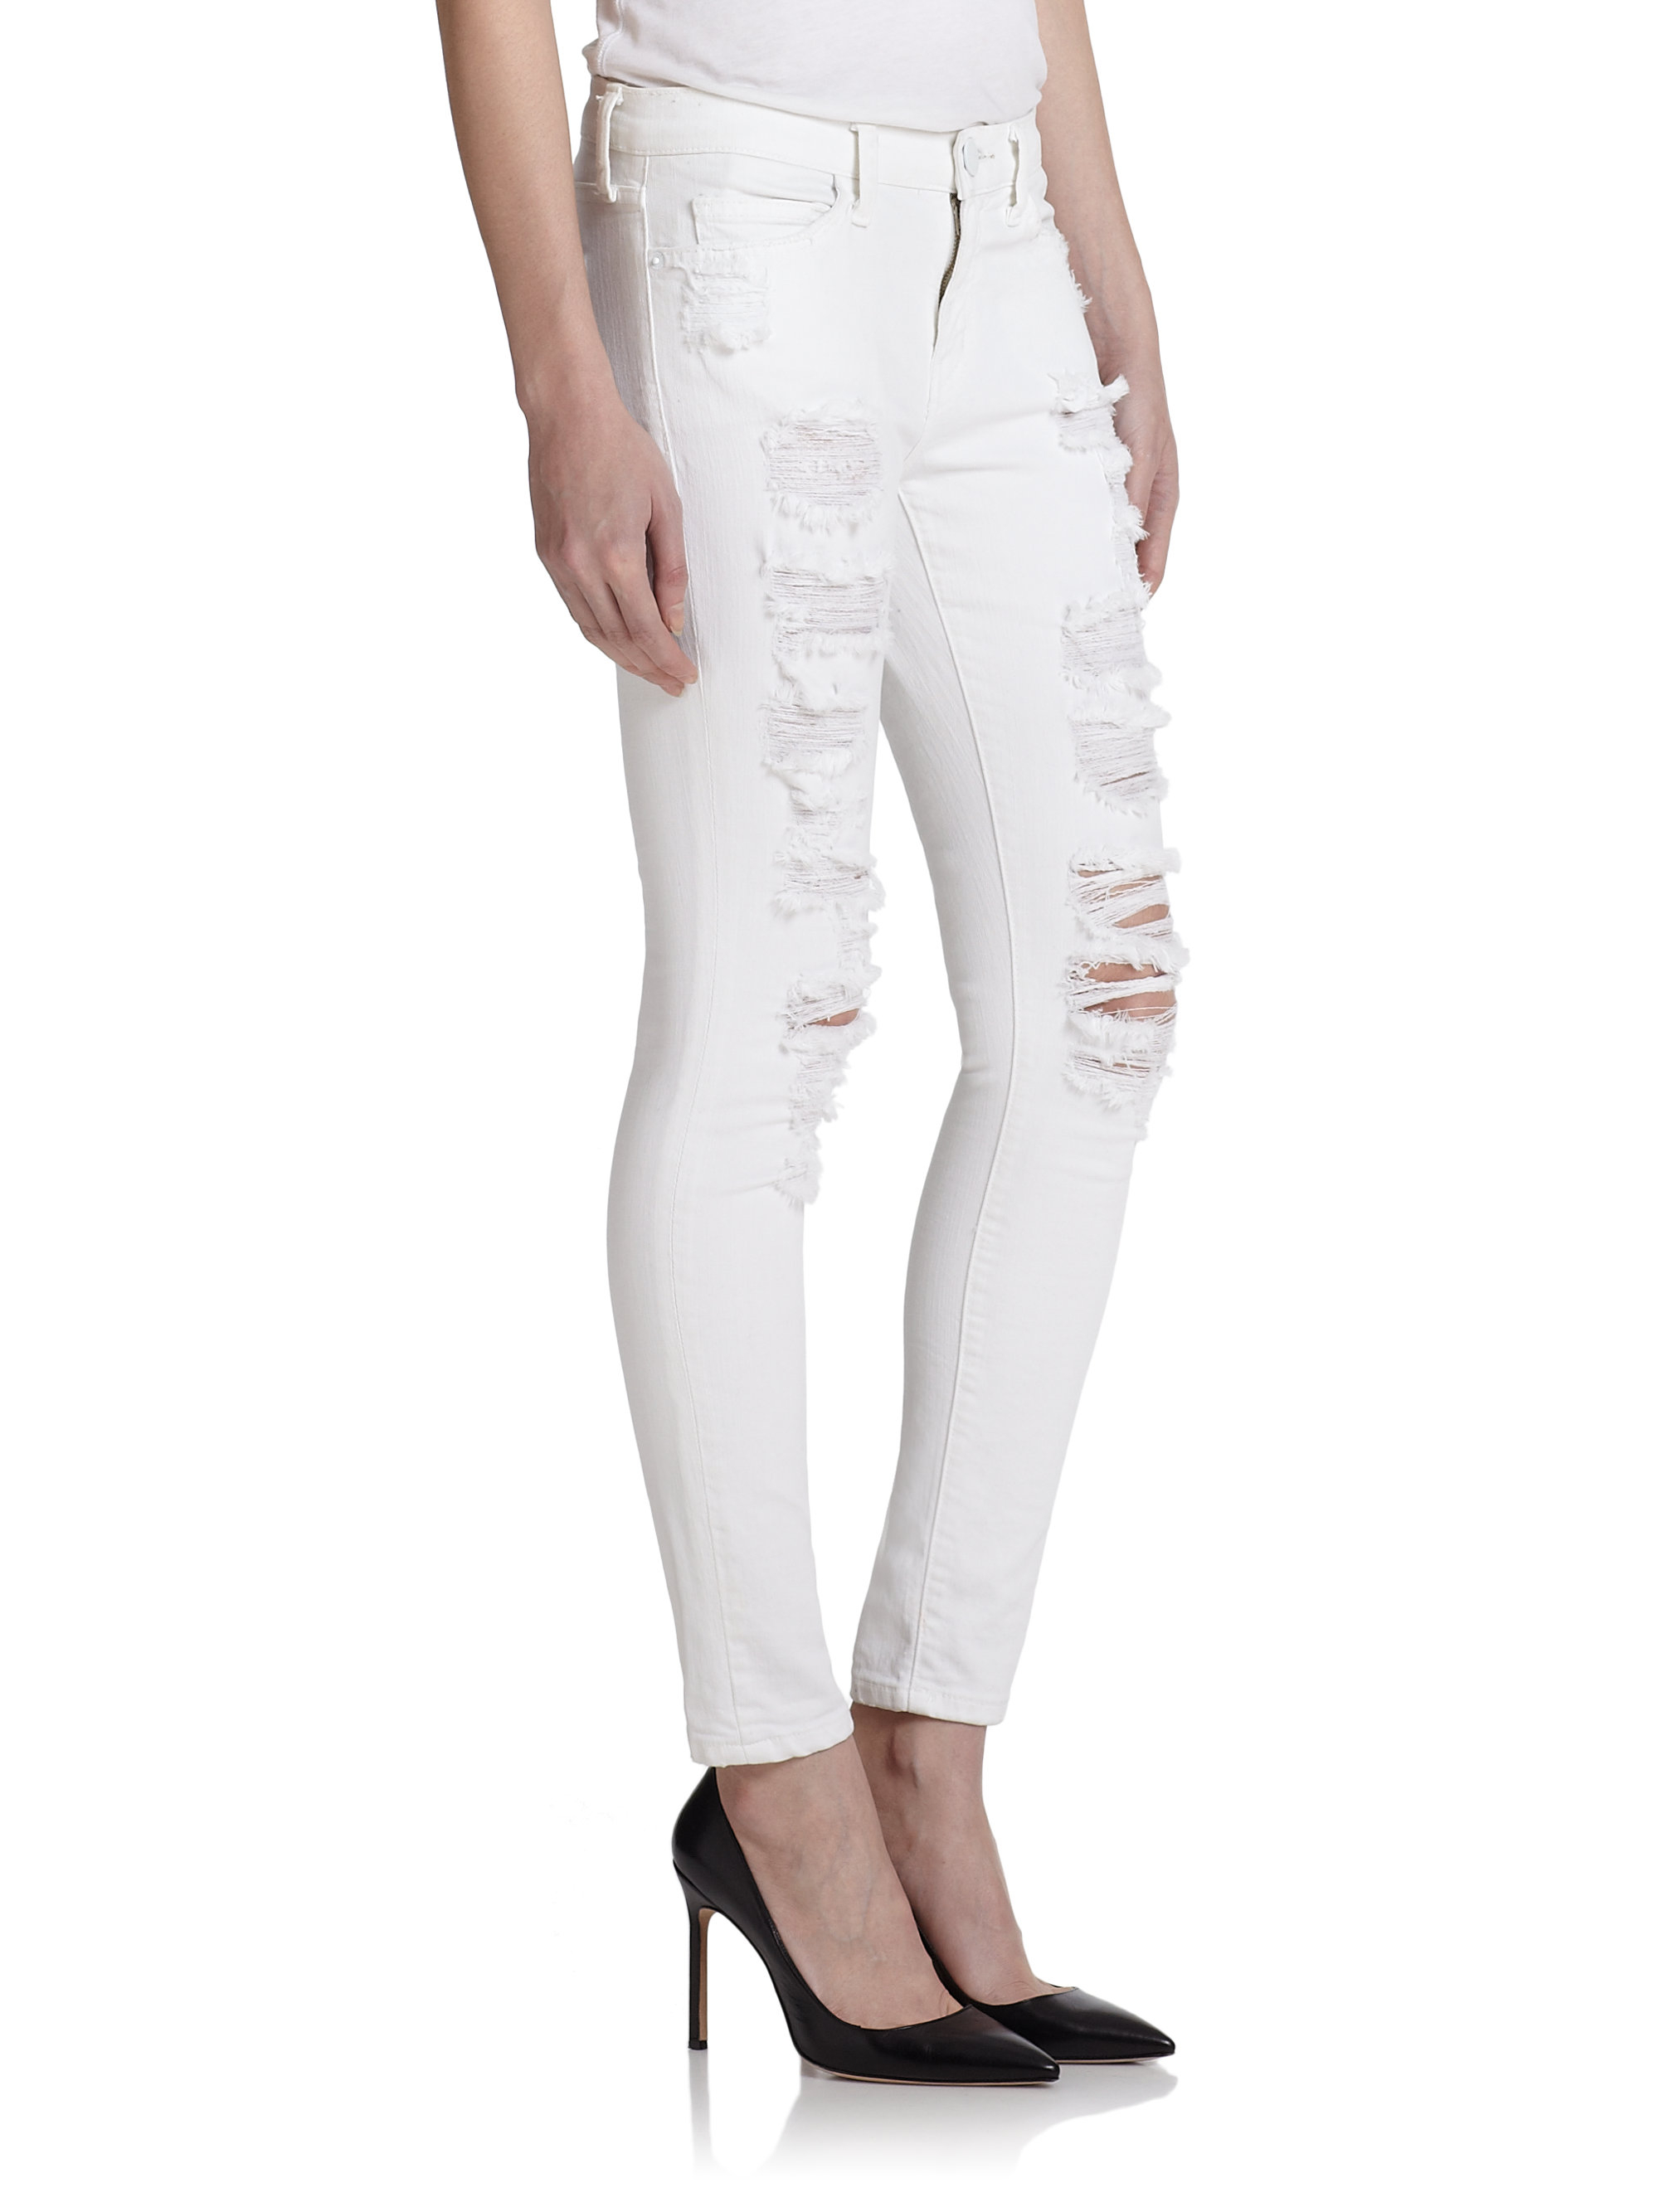 Lyst - Current/Elliott The Stiletto Distressed Skinny Jeans in White